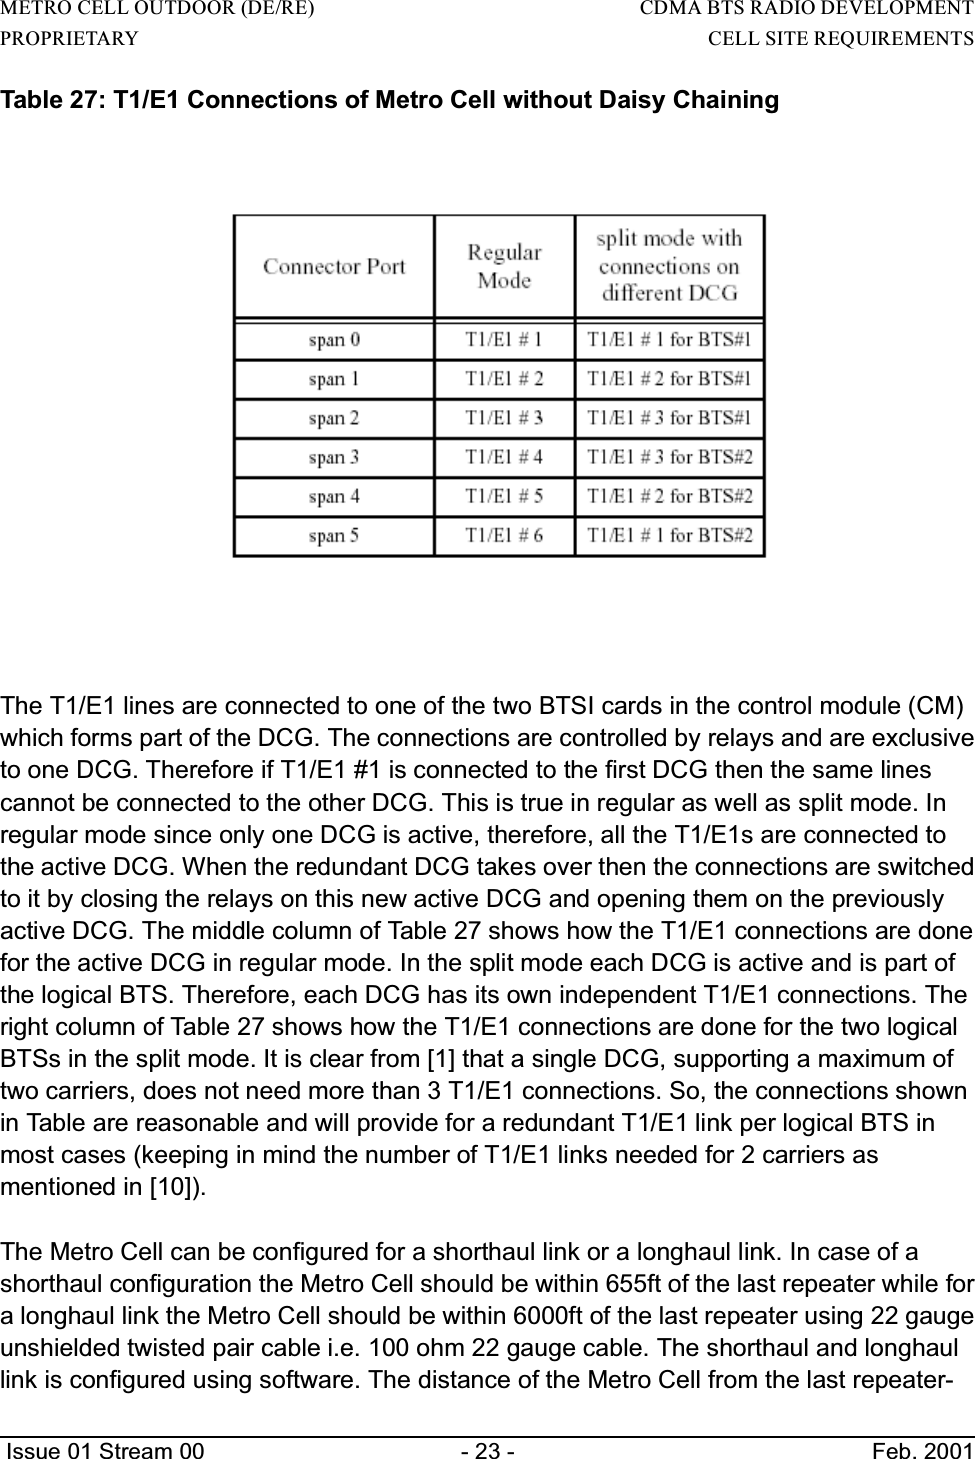 METRO CELL OUTDOOR (DE/RE)                                                                     CDMA BTS RADIO DEVELOPMENTPROPRIETARY                                                                                                                        CELL SITE REQUIREMENTS Issue 01 Stream 00 - 23 - Feb. 2001Table 27: T1/E1 Connections of Metro Cell without Daisy ChainingThe T1/E1 lines are connected to one of the two BTSI cards in the control module (CM)which forms part of the DCG. The connections are controlled by relays and are exclusiveto one DCG. Therefore if T1/E1 #1 is connected to the first DCG then the same linescannot be connected to the other DCG. This is true in regular as well as split mode. Inregular mode since only one DCG is active, therefore, all the T1/E1s are connected tothe active DCG. When the redundant DCG takes over then the connections are switchedto it by closing the relays on this new active DCG and opening them on the previouslyactive DCG. The middle column of Table 27 shows how the T1/E1 connections are donefor the active DCG in regular mode. In the split mode each DCG is active and is part ofthe logical BTS. Therefore, each DCG has its own independent T1/E1 connections. Theright column of Table 27 shows how the T1/E1 connections are done for the two logicalBTSs in the split mode. It is clear from [1] that a single DCG, supporting a maximum oftwo carriers, does not need more than 3 T1/E1 connections. So, the connections shownin Table are reasonable and will provide for a redundant T1/E1 link per logical BTS inmost cases (keeping in mind the number of T1/E1 links needed for 2 carriers asmentioned in [10]).The Metro Cell can be configured for a shorthaul link or a longhaul link. In case of ashorthaul configuration the Metro Cell should be within 655ft of the last repeater while fora longhaul link the Metro Cell should be within 6000ft of the last repeater using 22 gaugeunshielded twisted pair cable i.e. 100 ohm 22 gauge cable. The shorthaul and longhaullink is configured using software. The distance of the Metro Cell from the last repeater-